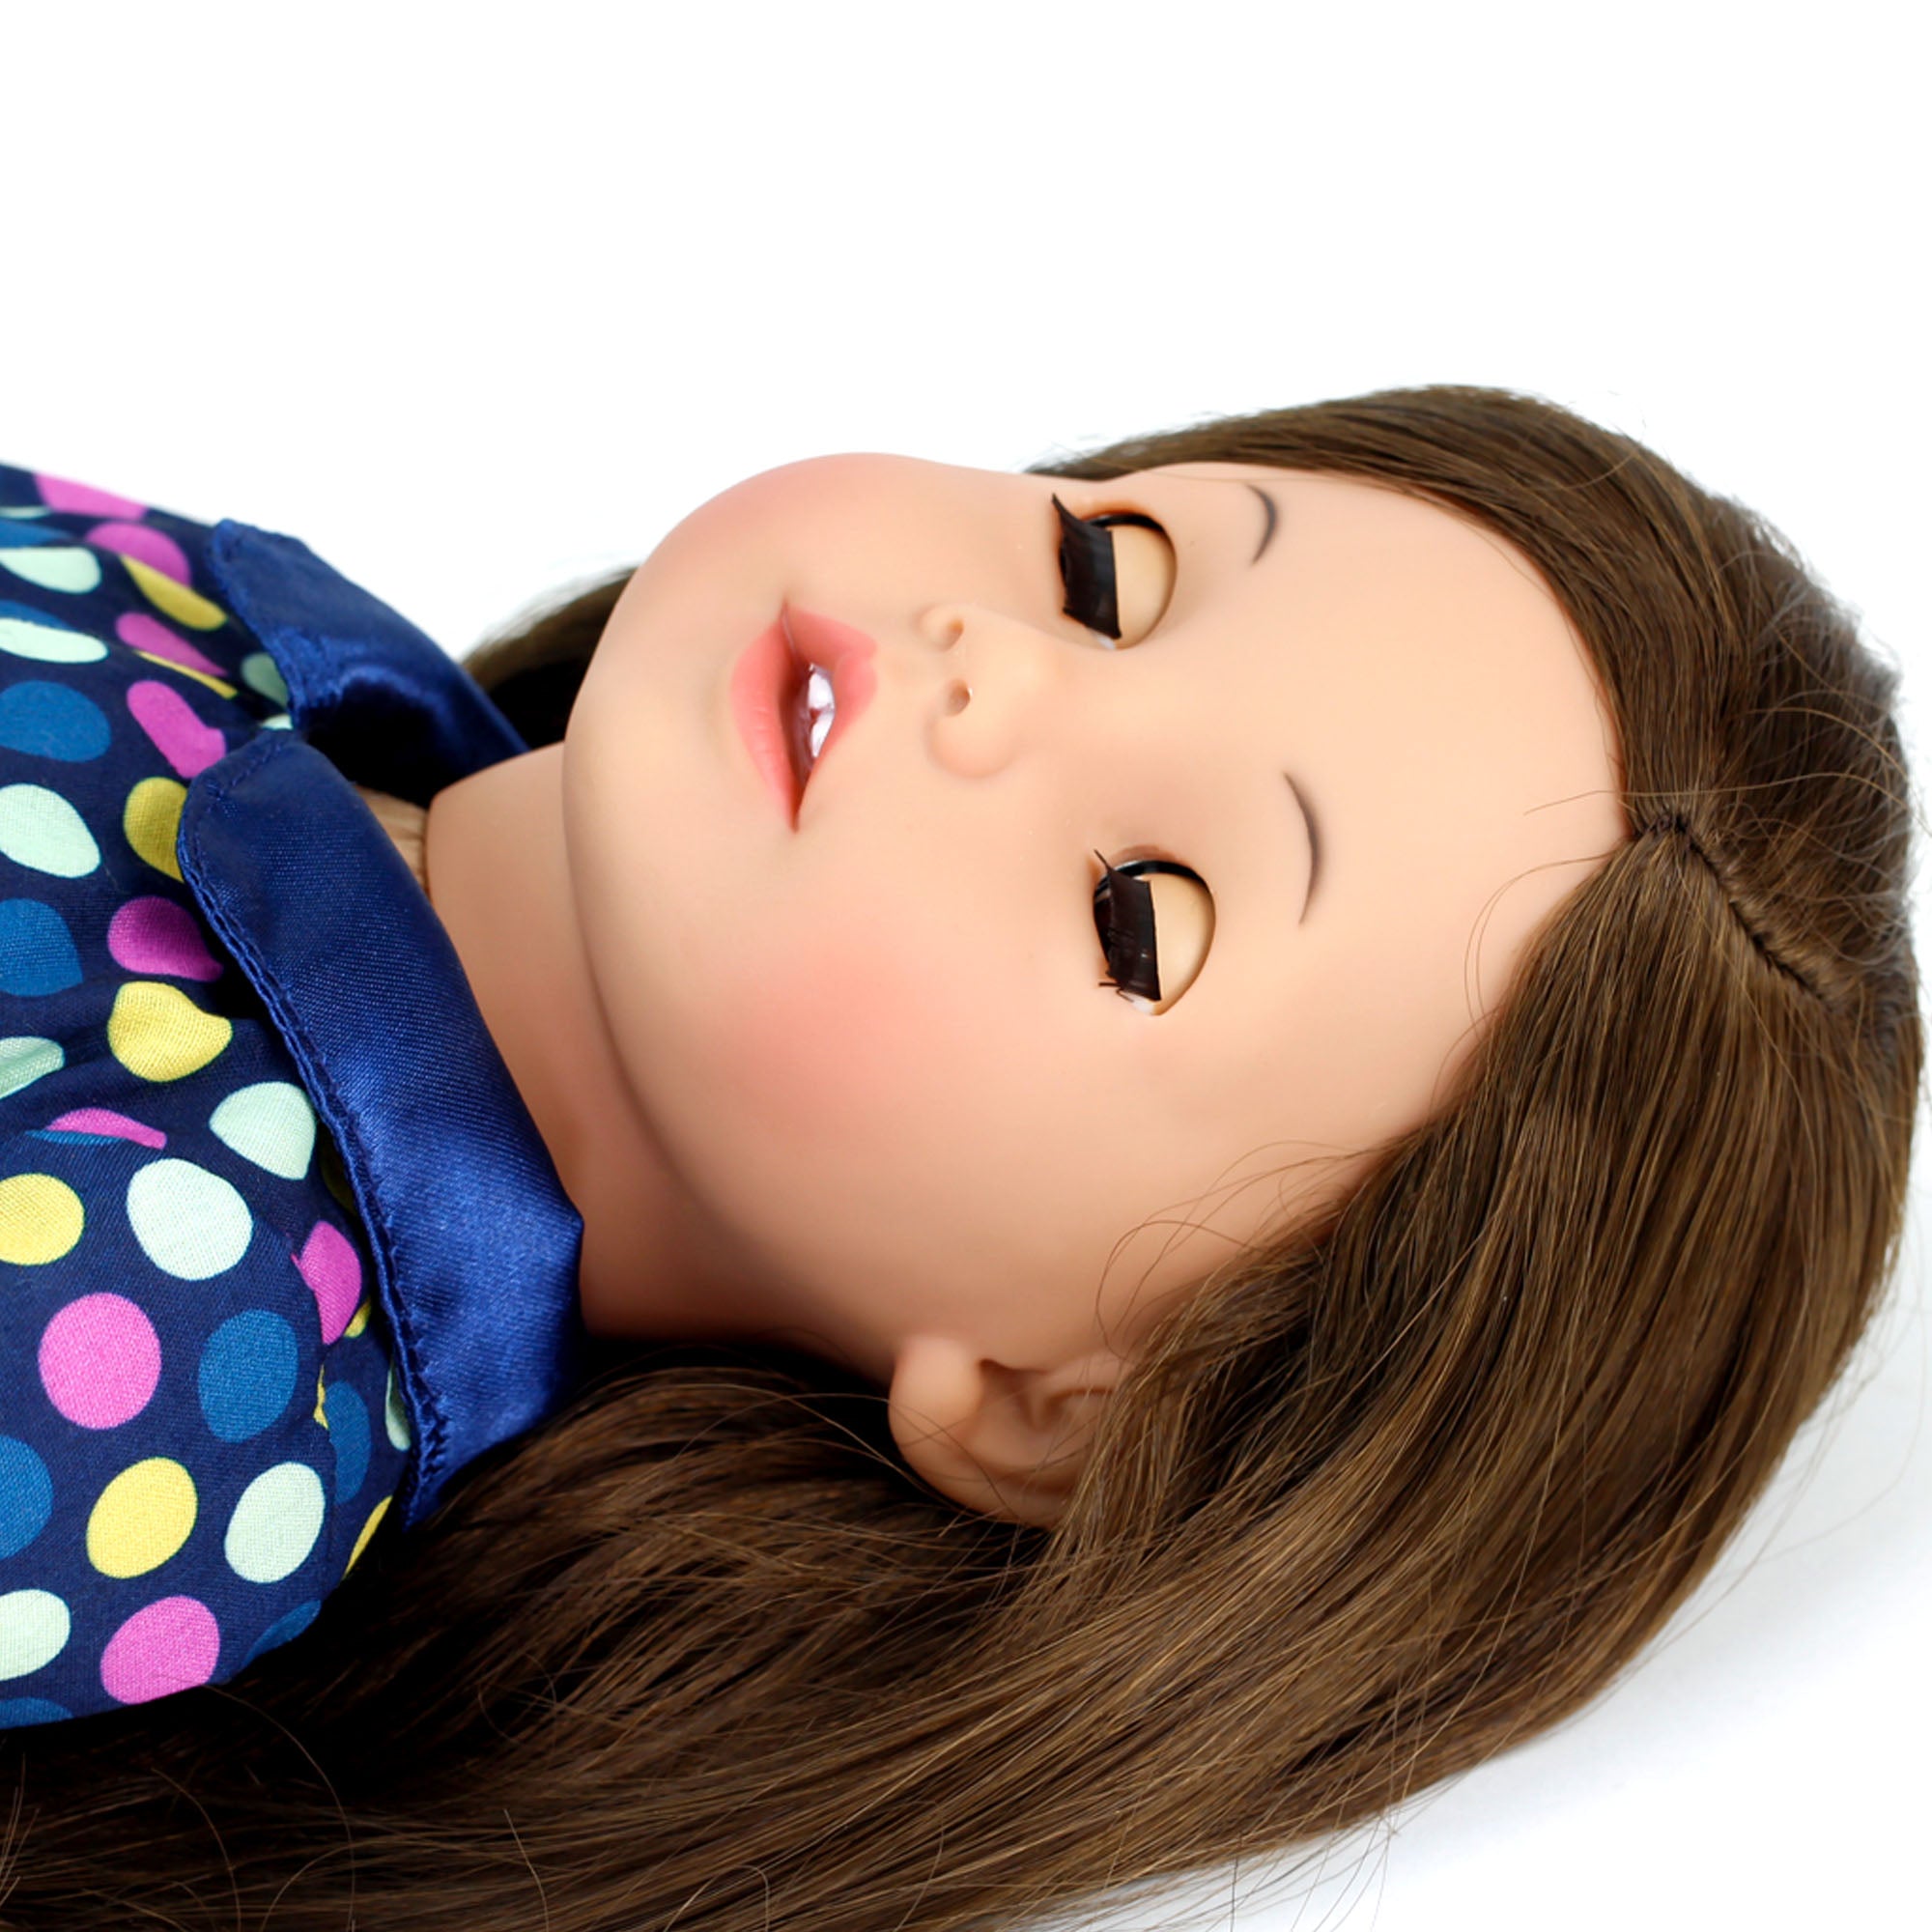 Sophia's Posable 18'' Soft Bodied Vinyl Doll "Catherine" with Brunette Hair and Brown Eyes, Light Skin Tone